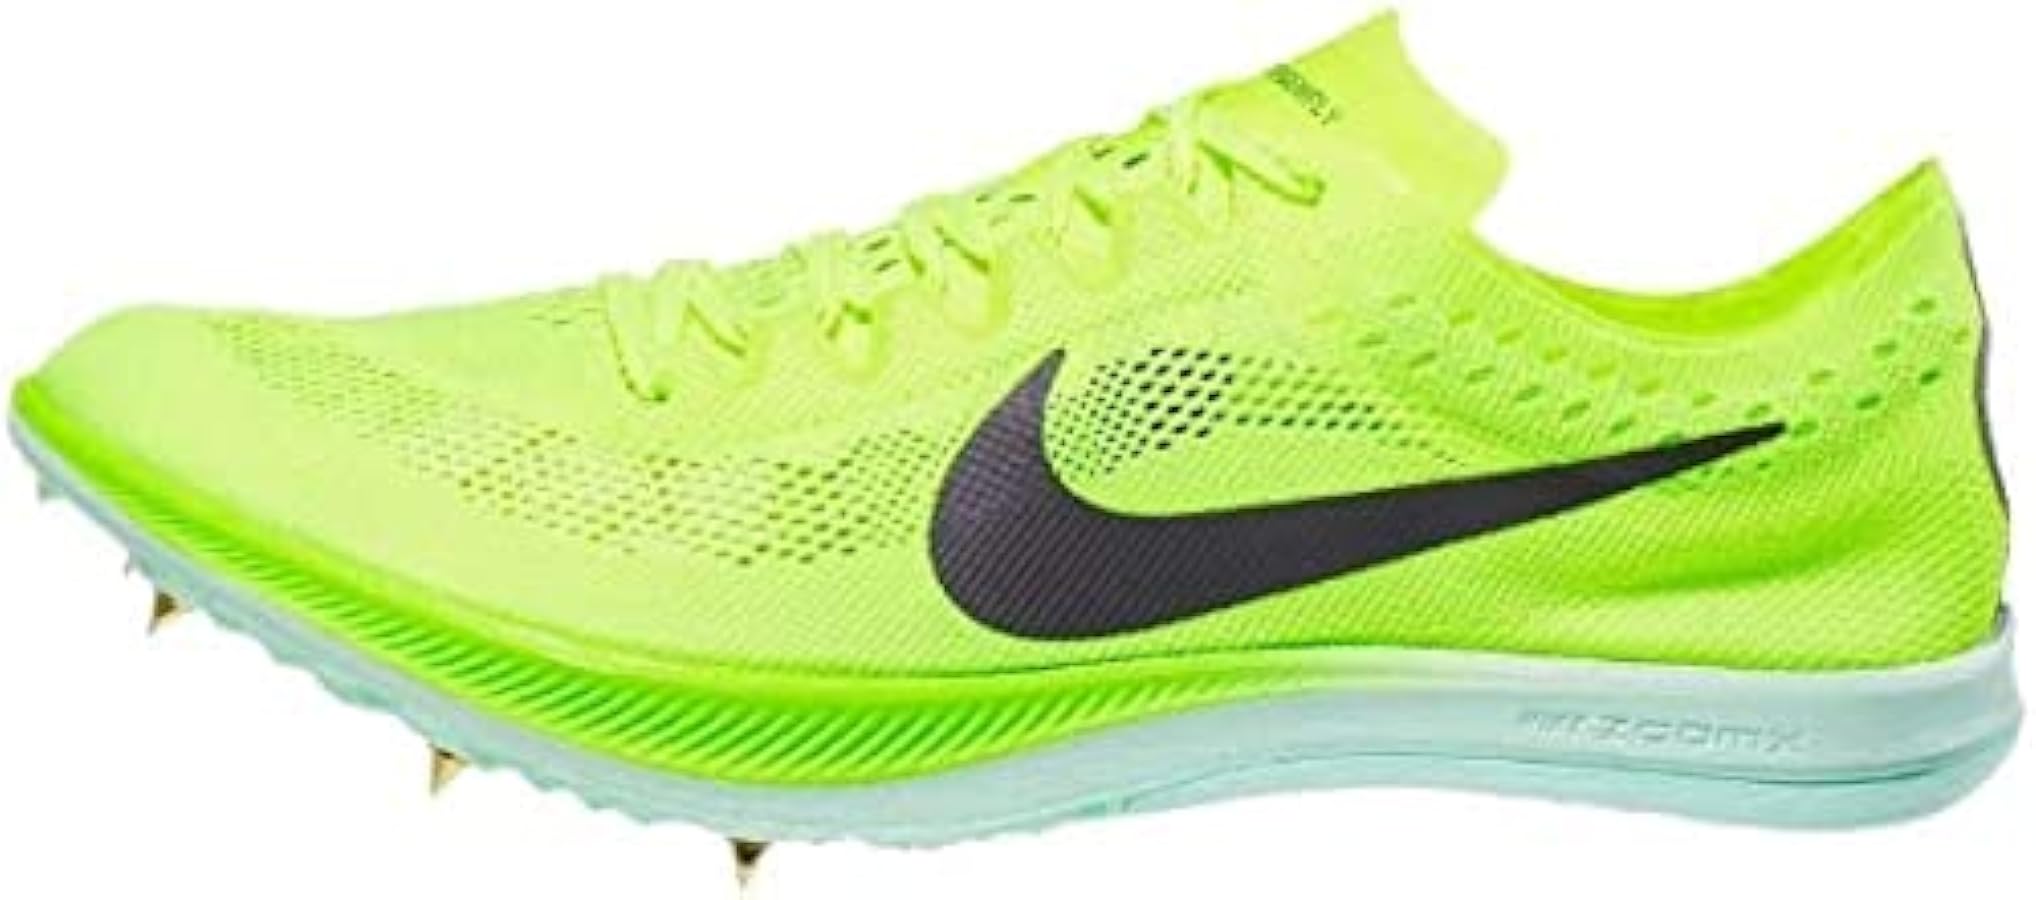 Nike Men’s ZoomX Dragonfly Track and Field Shoes Review